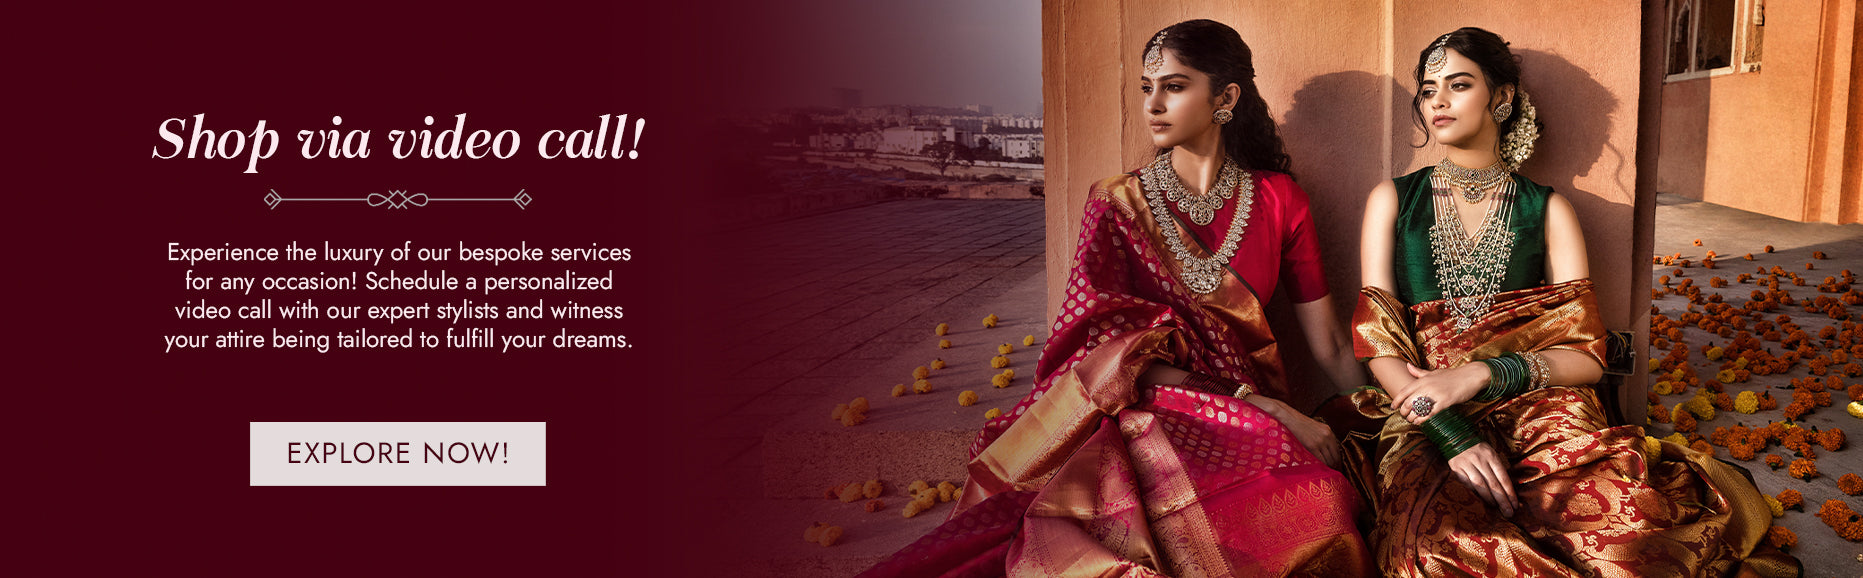 Indulge in luxury sarees online by scheduling a personalized video call appointment.